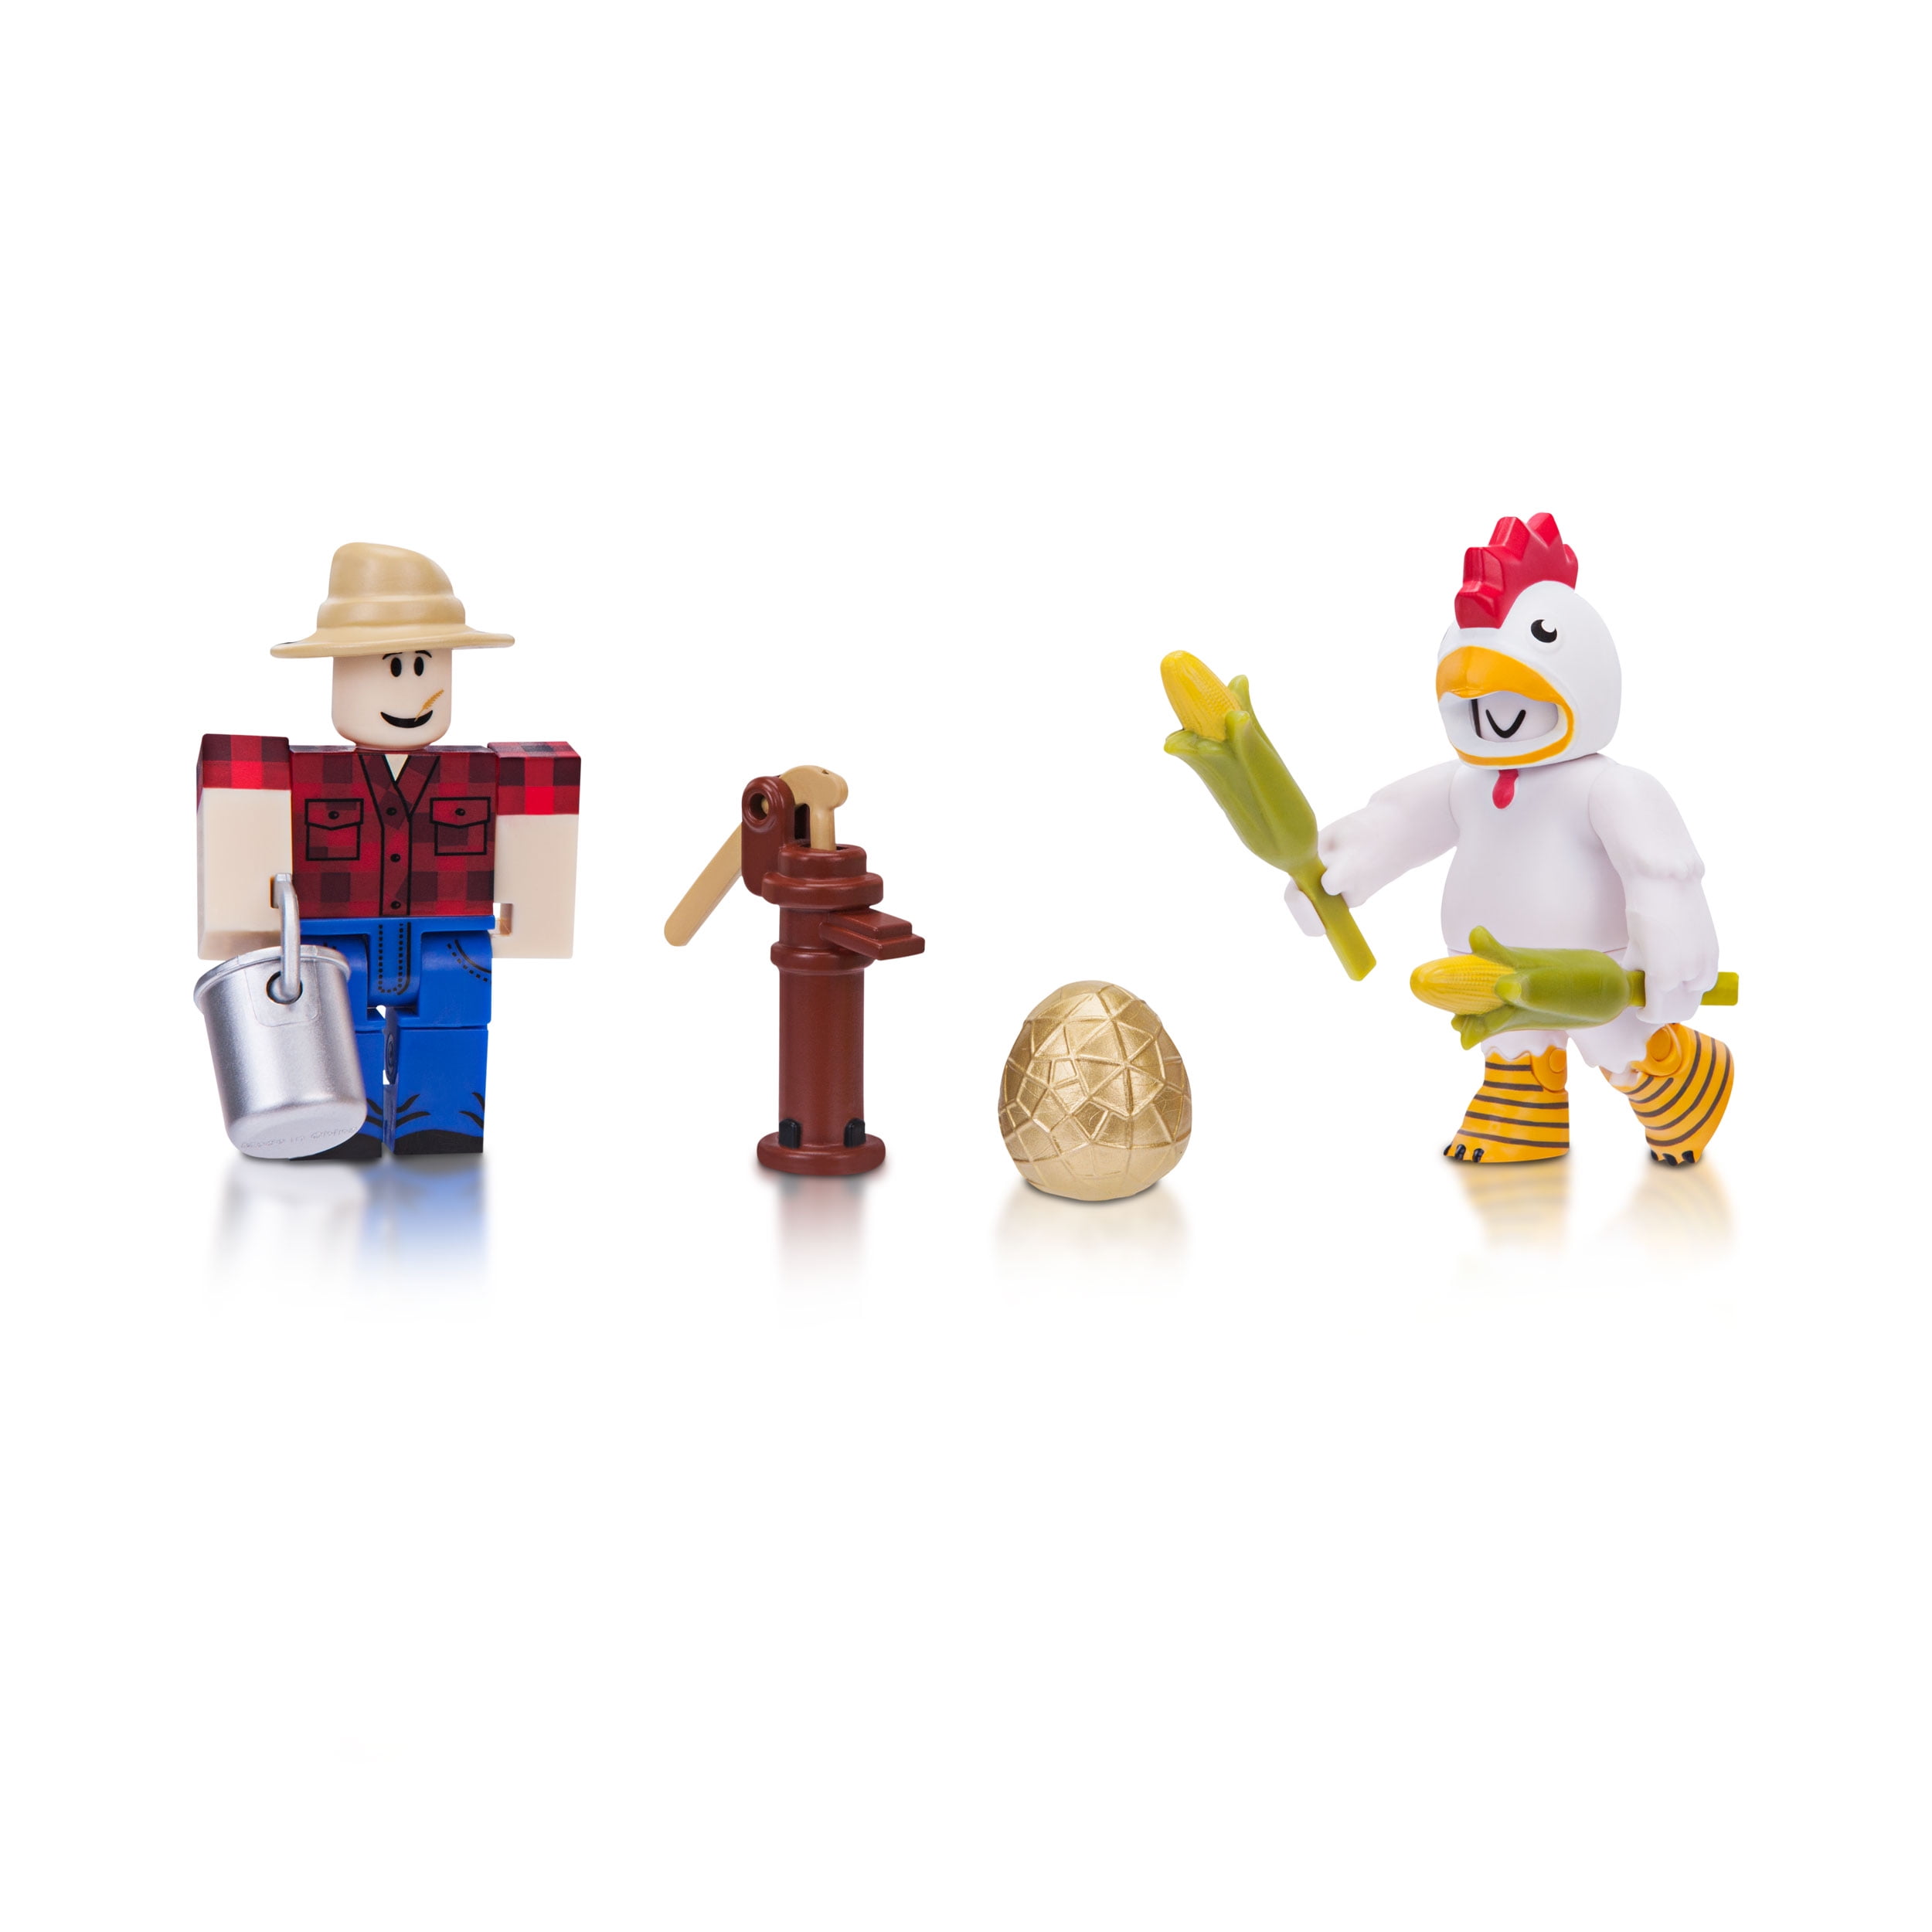 Roblox Action Collection Chicken Simulator Game Pack Includes Exclusive Virtual Item Walmart Com Walmart Com - roblox egg farm simulator new egg farm simulator how